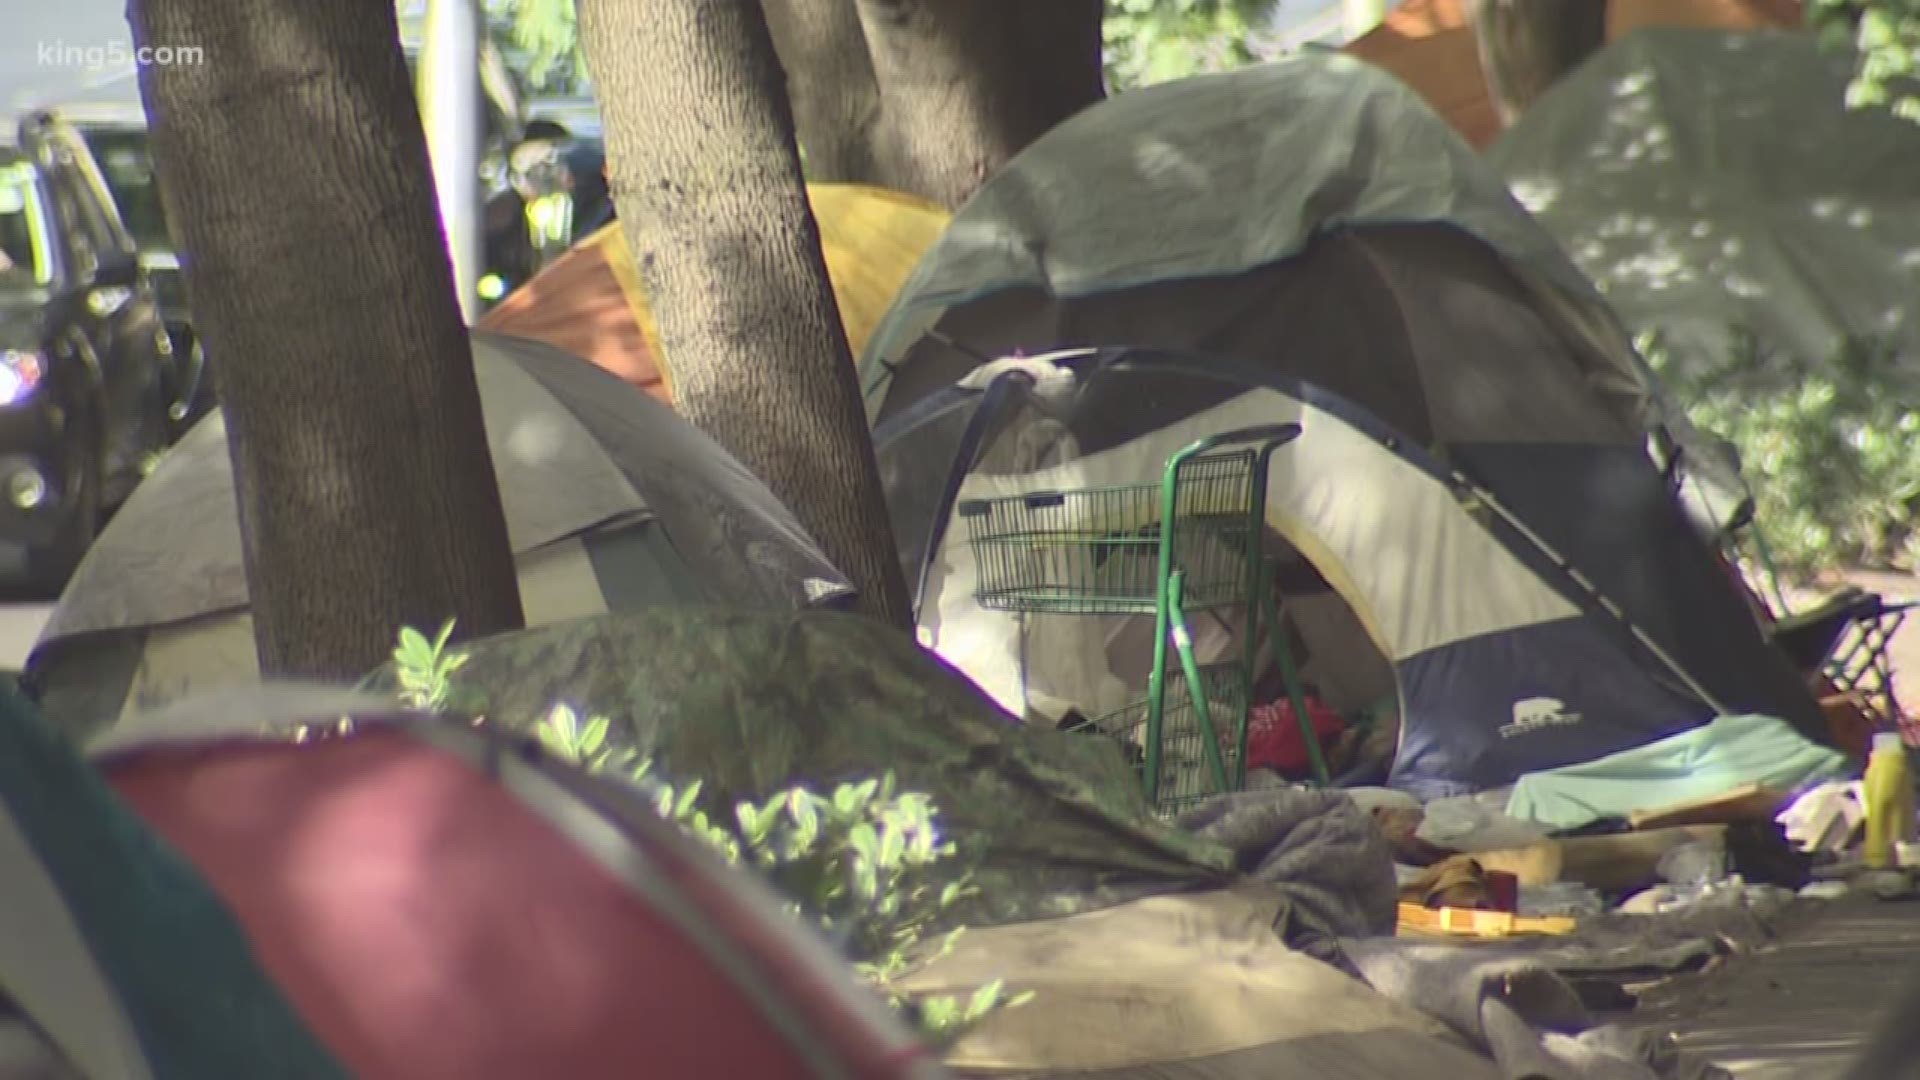 There are fewer people experiencing homelessness in King County now than there were a year ago, according to the latest data.